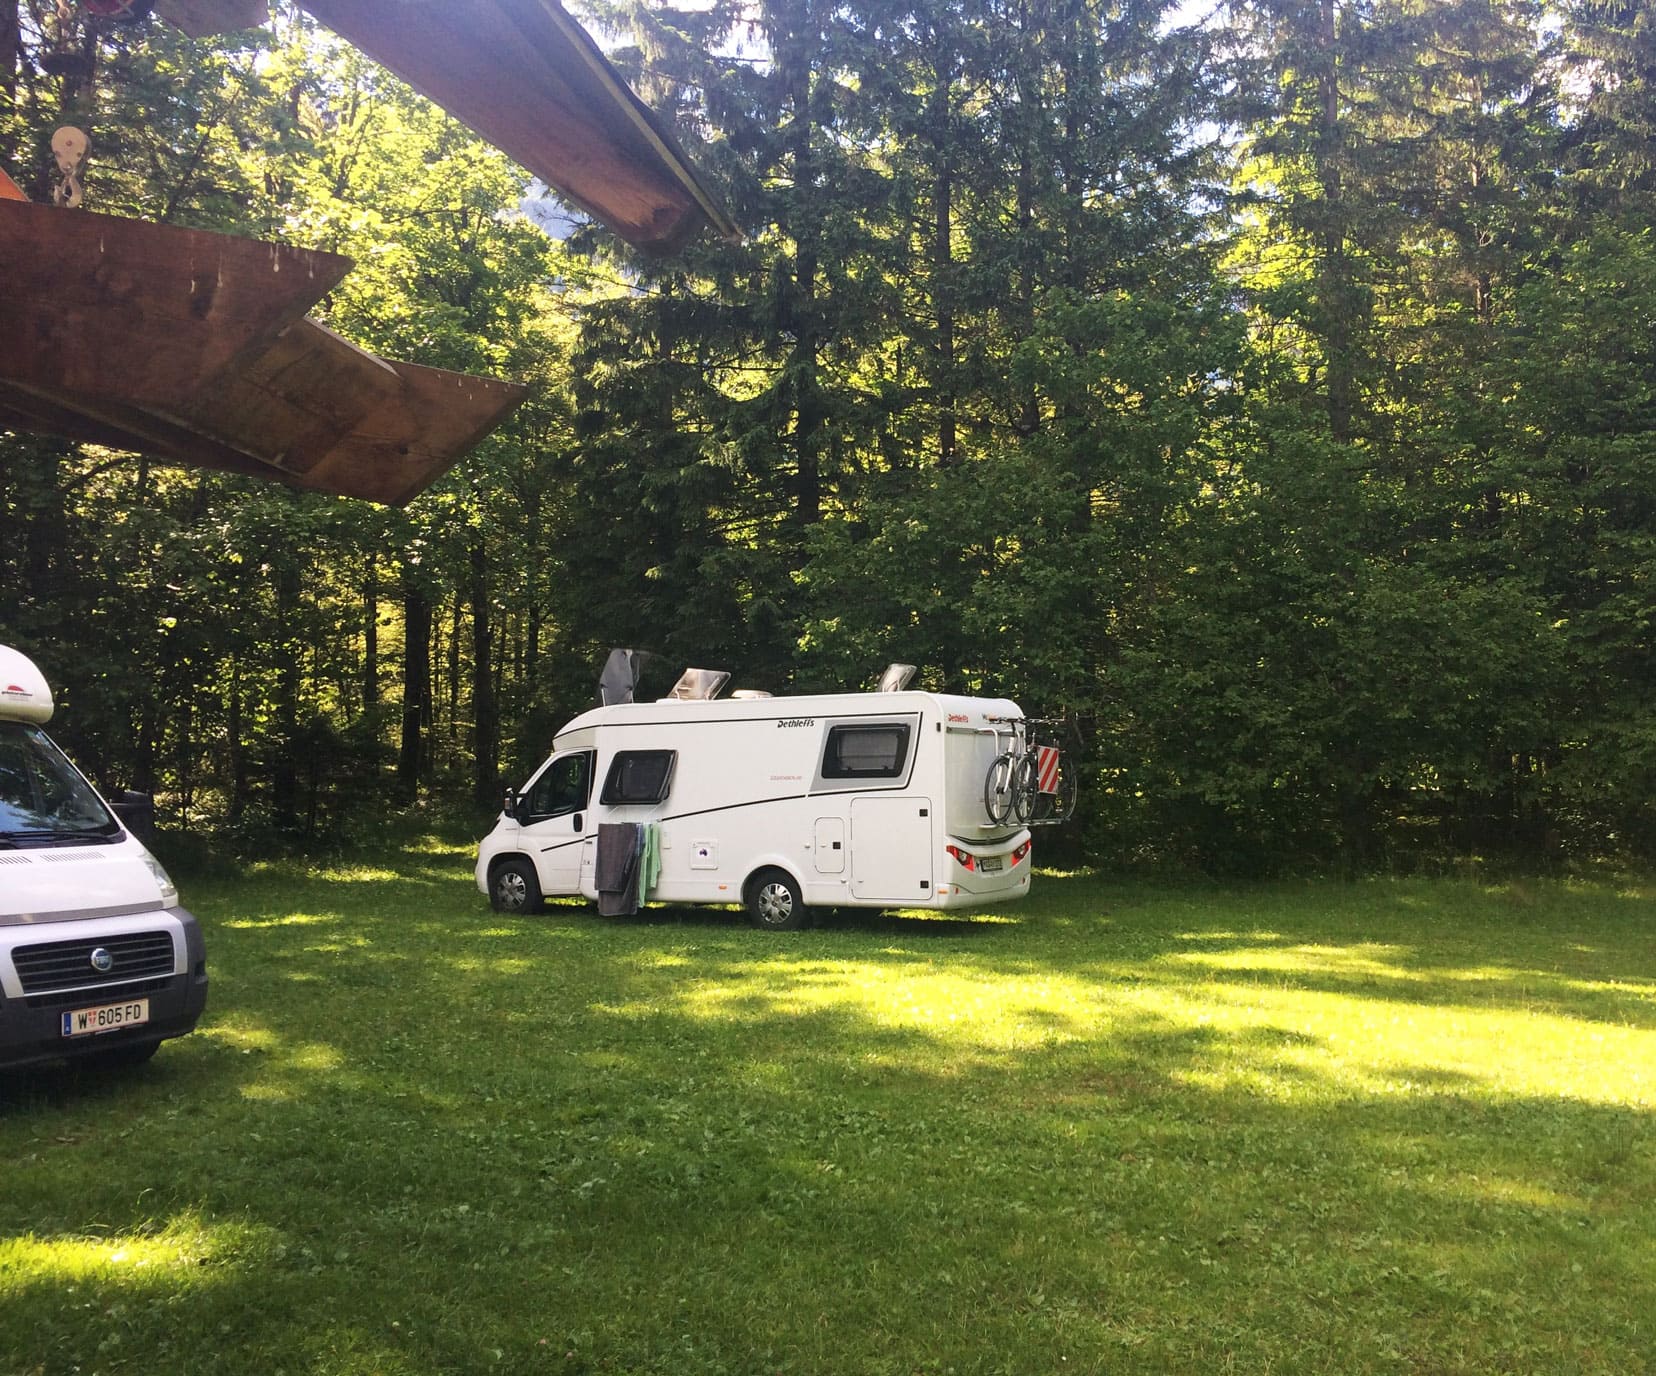 Campervanning-in-Europe motorhome-parked-in-Slovenia on green grass and tall pine trees 